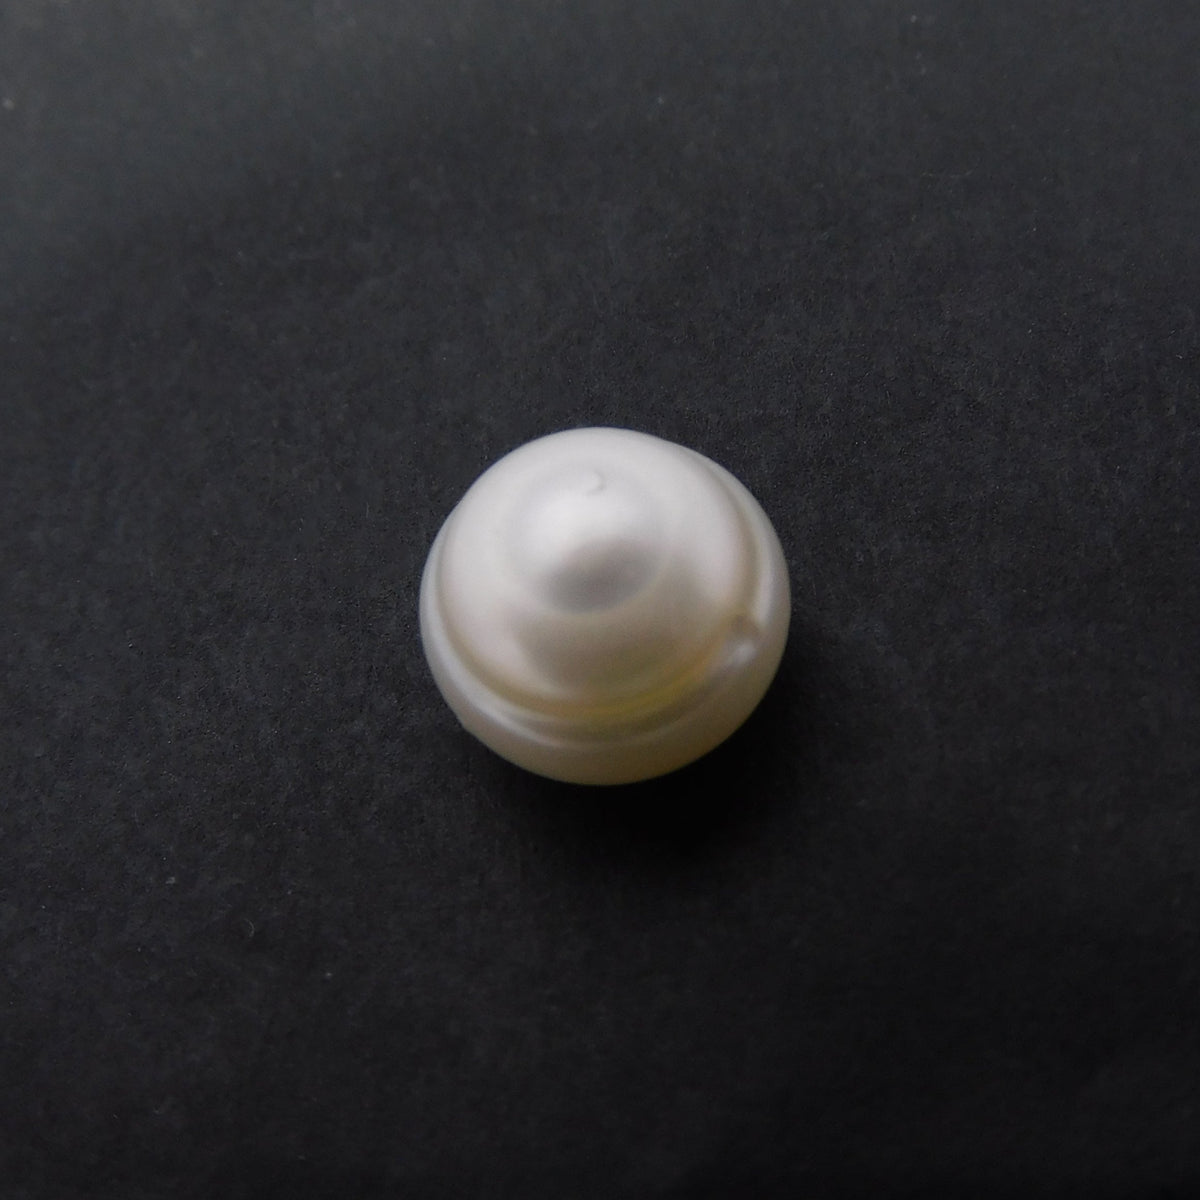 Mother's Day Special Offer !! Genuine Fresh Water Pearl 3.95 Carat Natural Certified White Pearl Loose Gemstone | Free Shipping With Extra Free Gift |